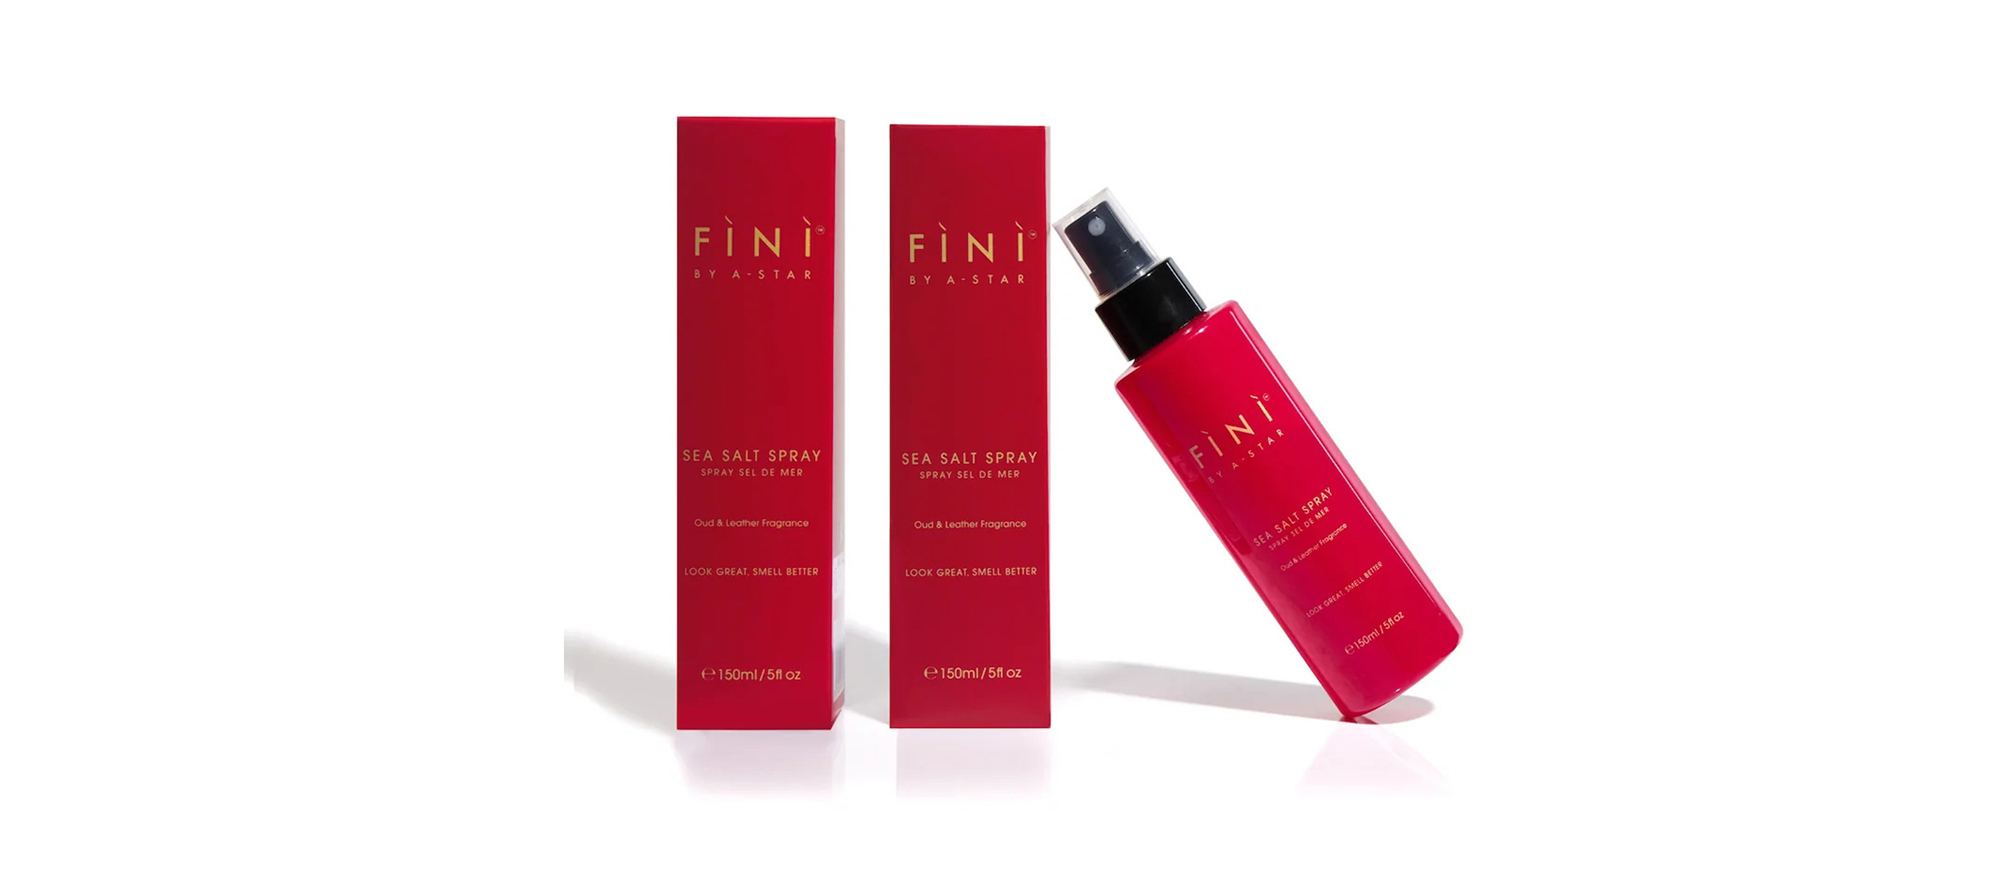 FINI By A-Star Sea Salt Spray BUY NOW FROM OUR SHOP